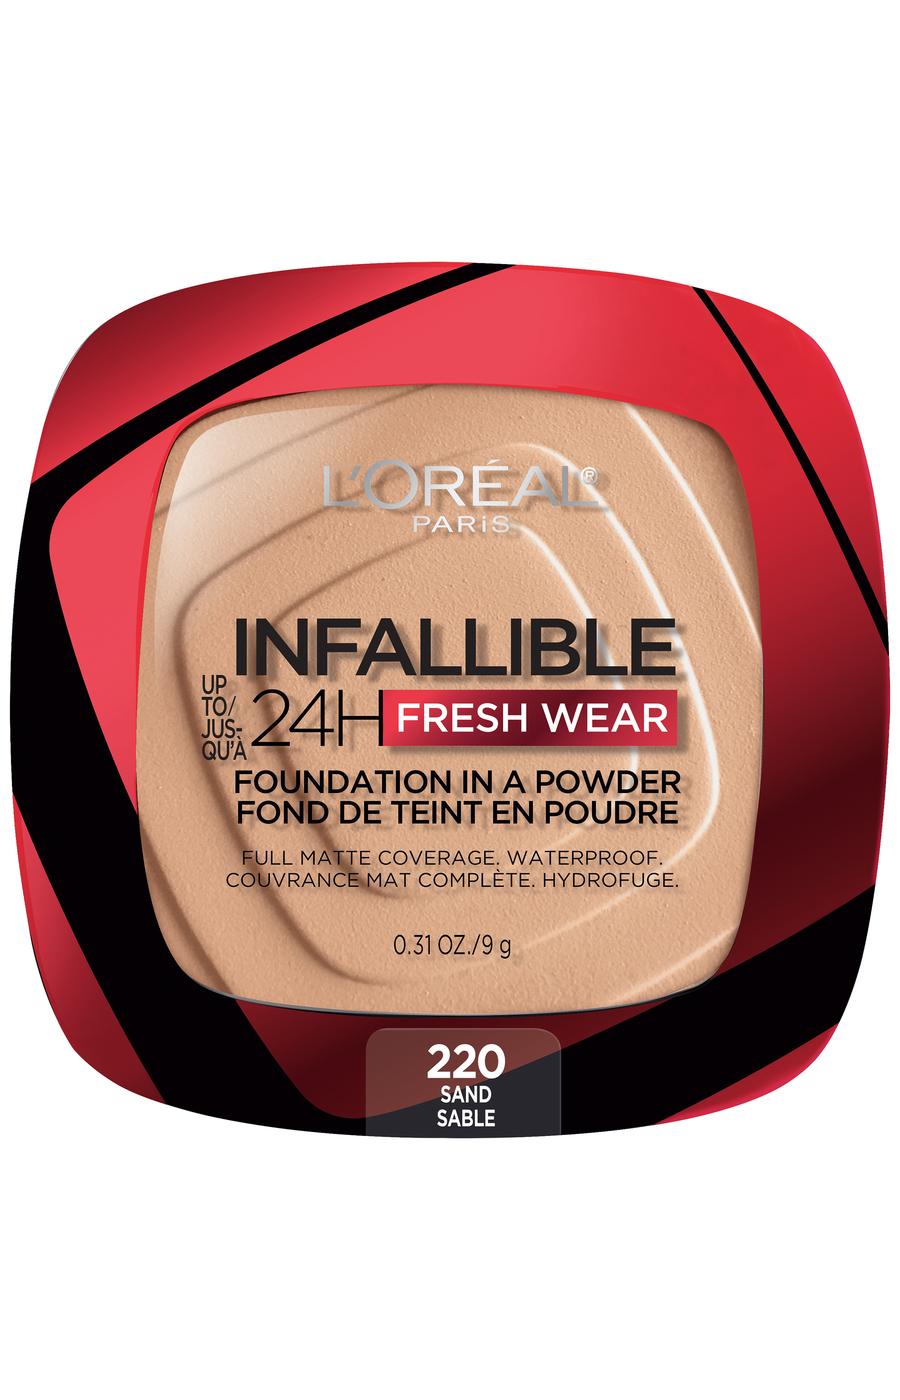 L'Oréal Paris Infallible Up to 24H Fresh Wear Foundation in a Powder Sand; image 1 of 4